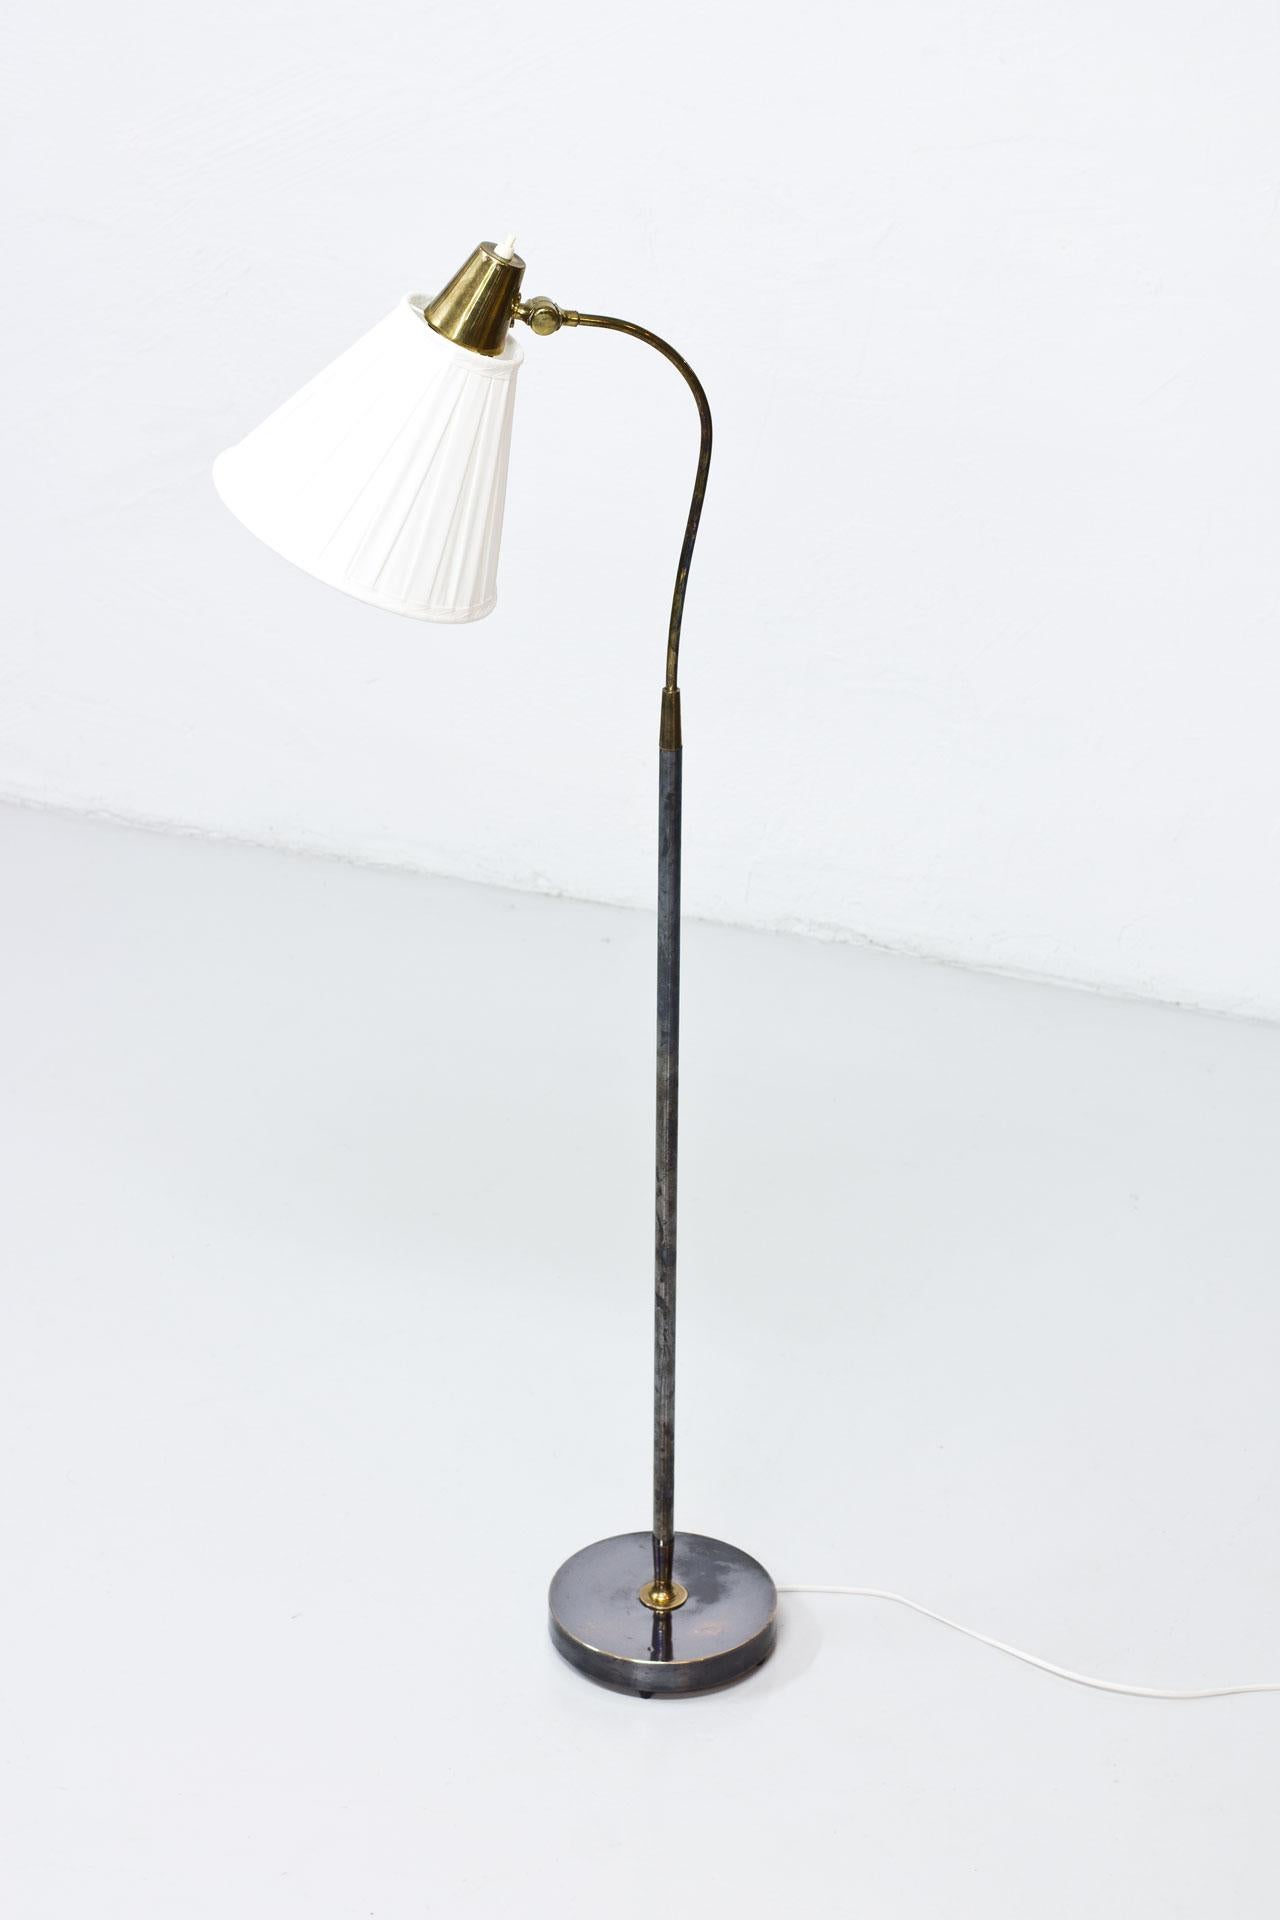 Floor lamp produced in Sweden by Falkenbergs Belysning during the 1950s. Made from oxidized brass and copper. Hand pleated lamp shade in off-white chintz fabric. New wiring.